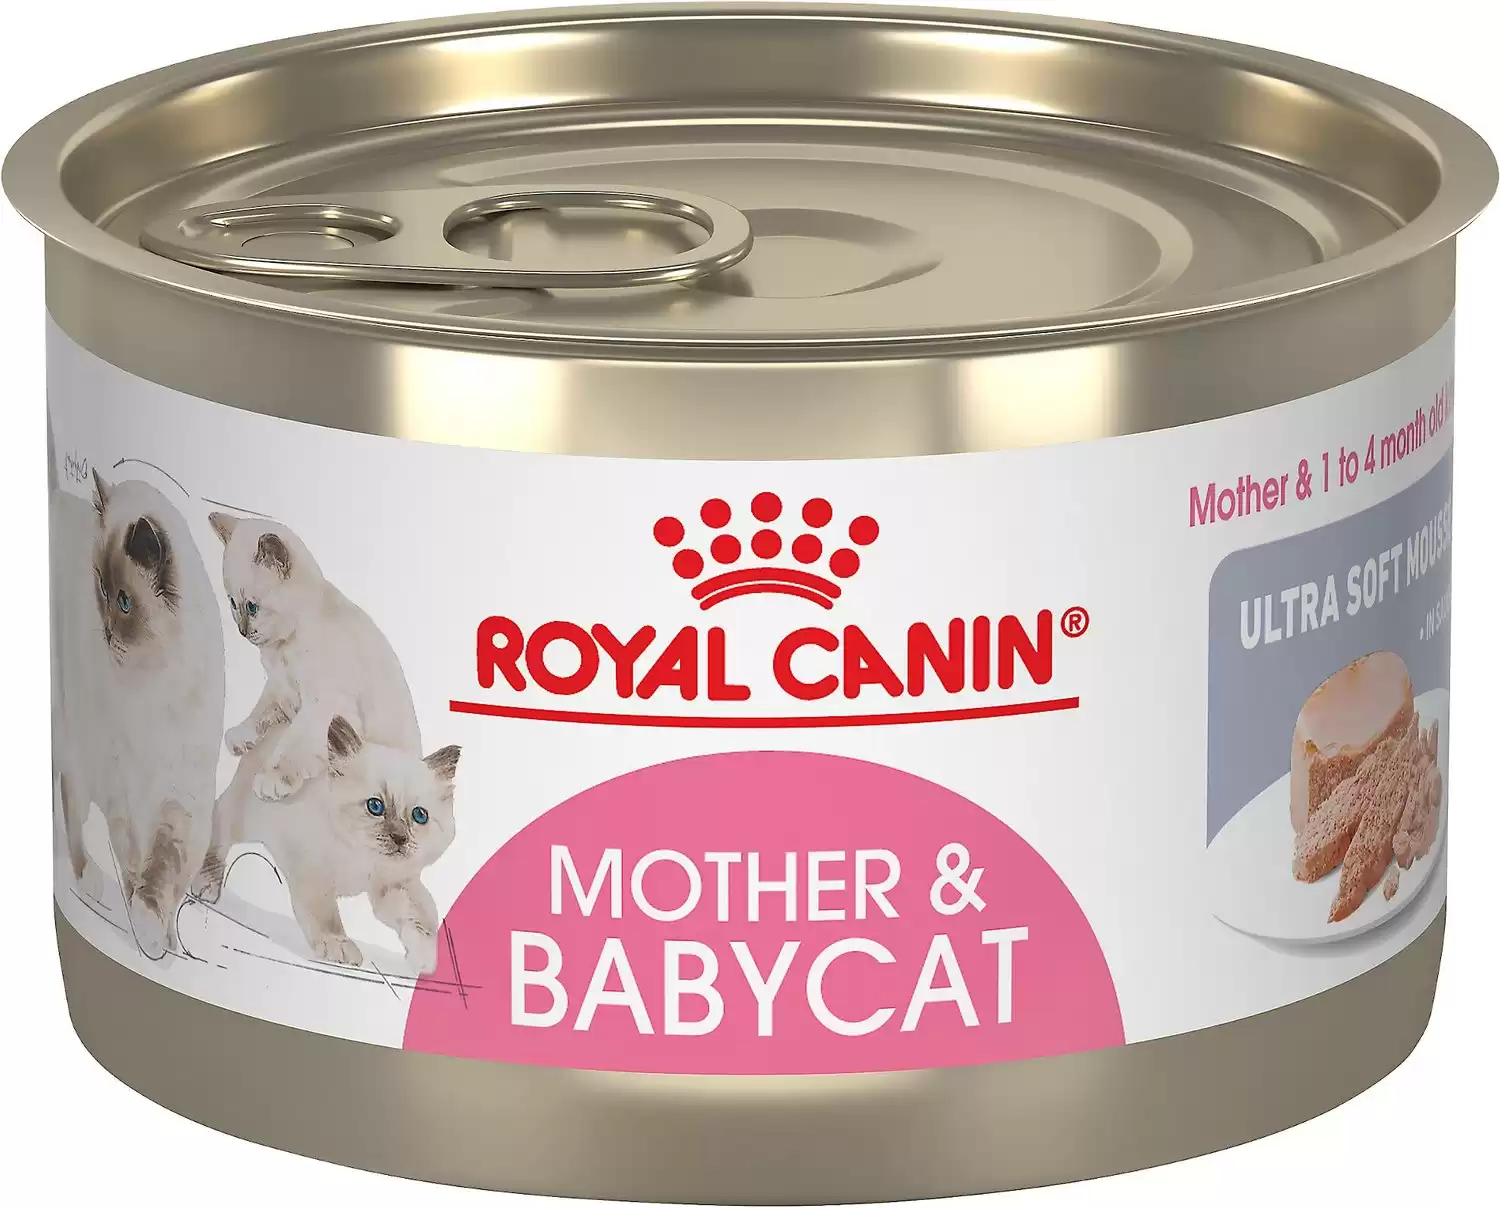 Royal Canin Mother & Babycat Ultra-Soft Mousse in Sauce Wet Food